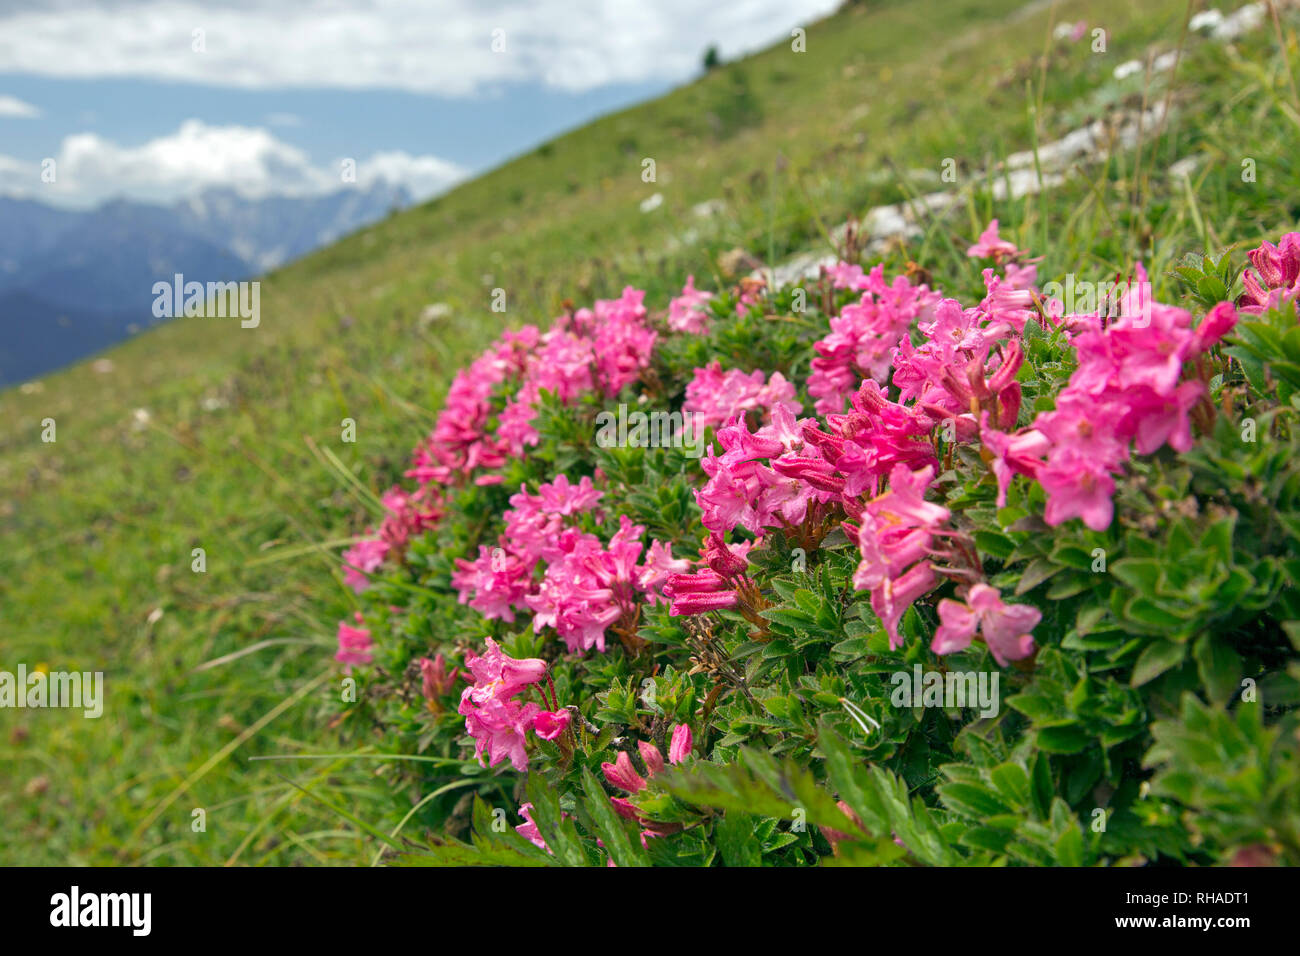 Snow-rose / rusty-leaved alpenrose (Rhododendron ferrugineum) in flower, Hohe Tauern National Park, Carinthia, Austria Stock Photo